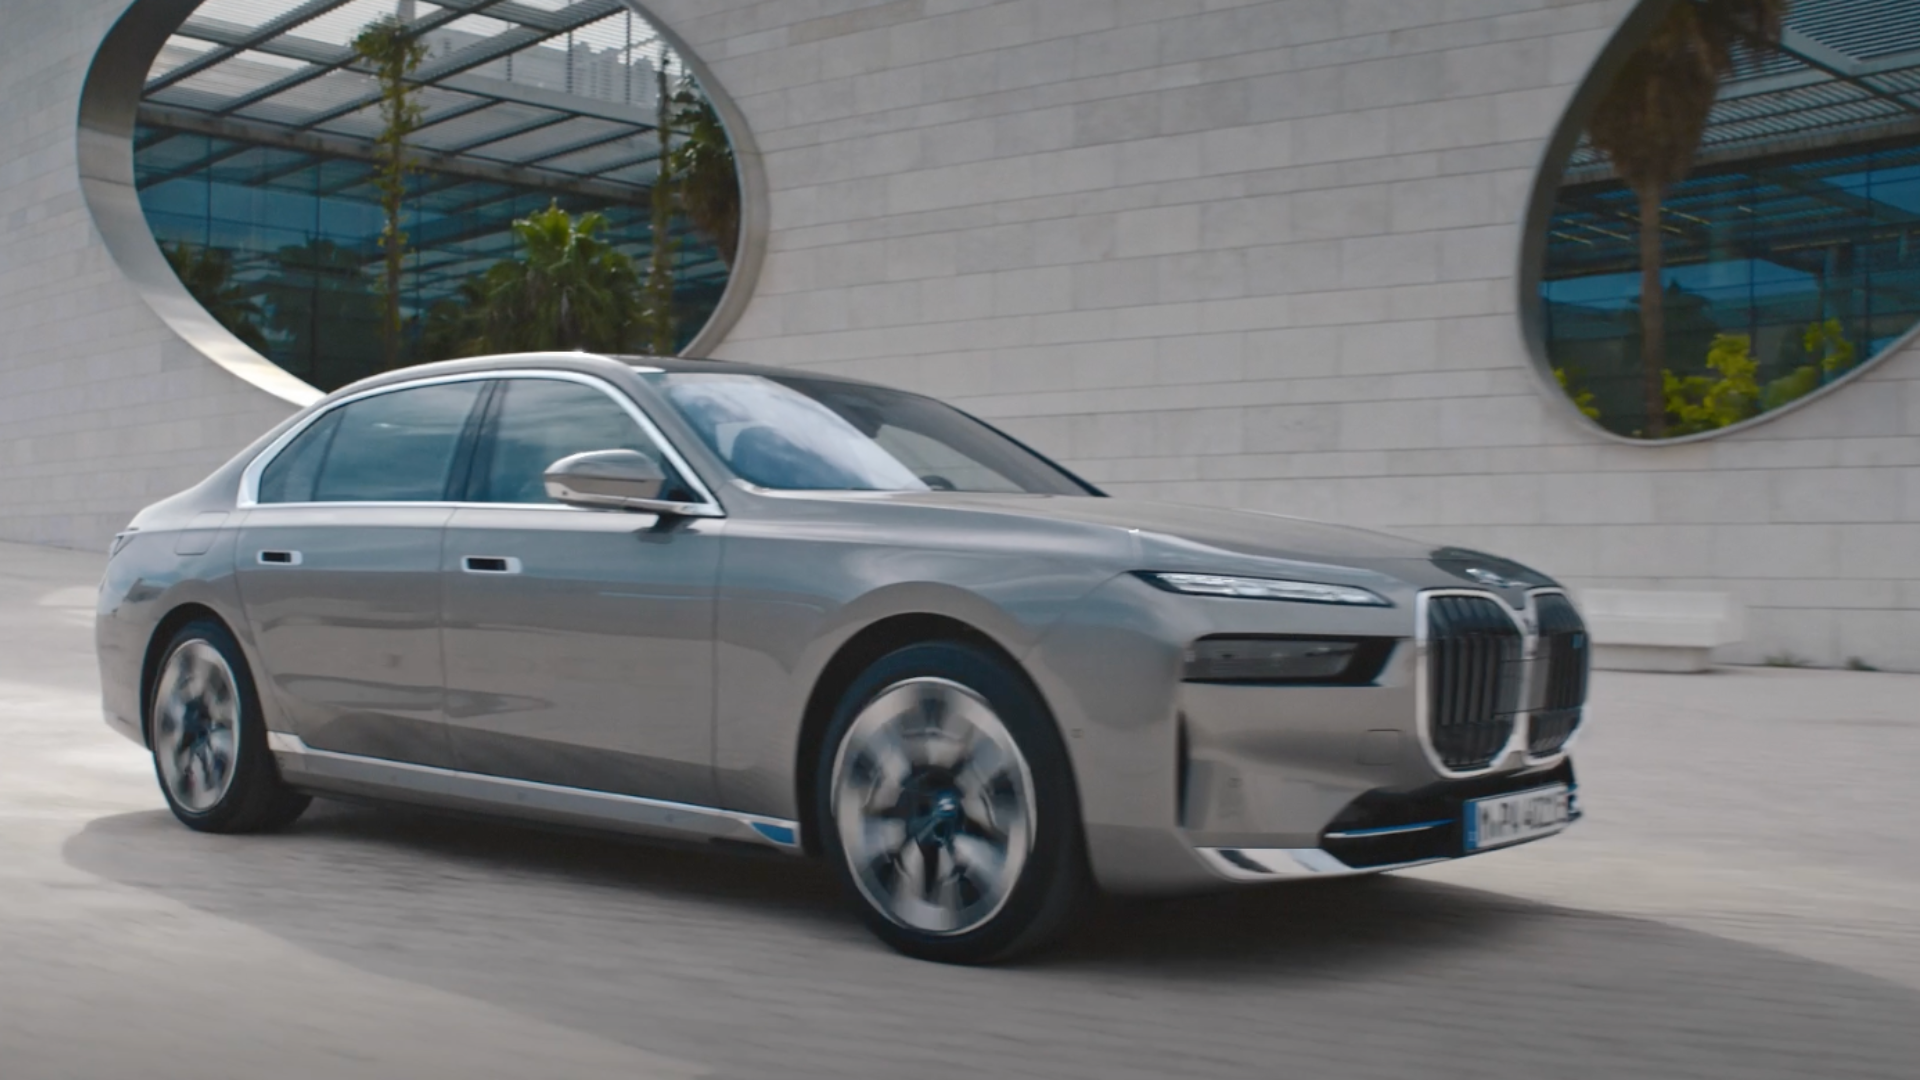 The Marcom Engine and BMW BELUX present the new BMW 7 series.